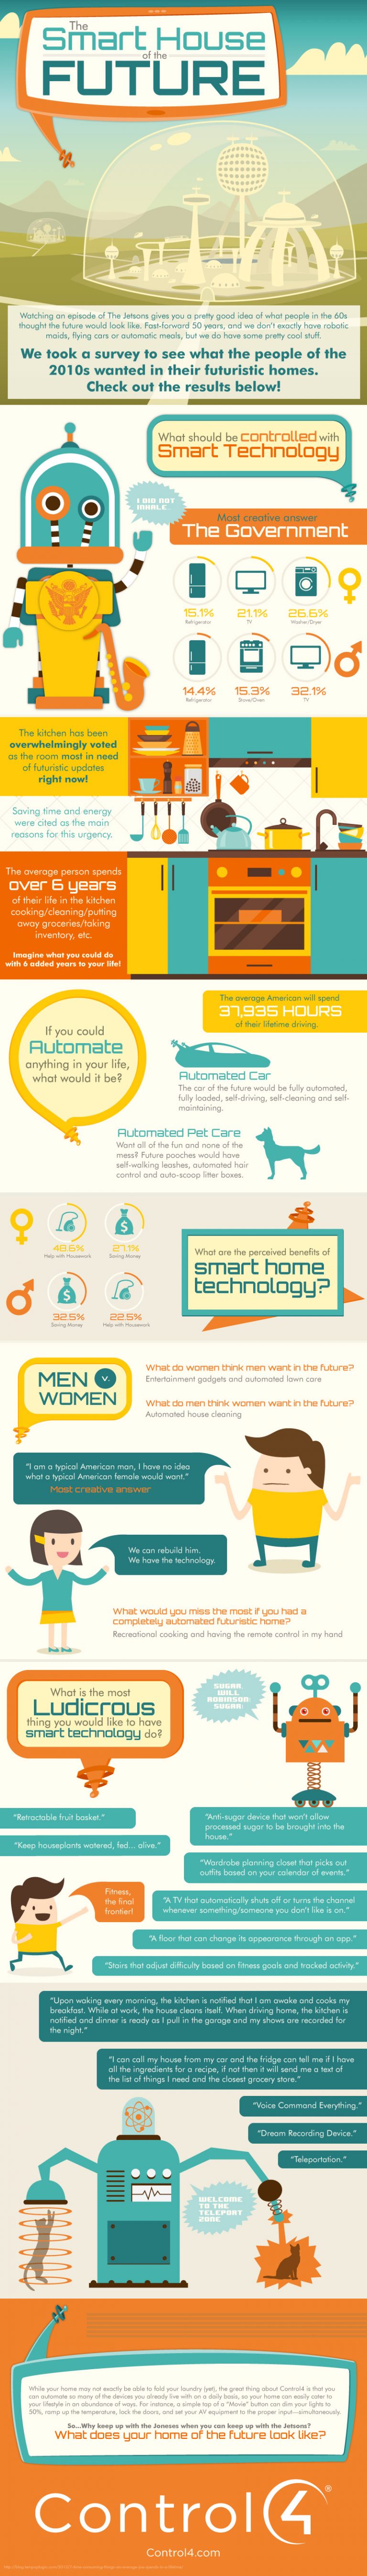 How Technology is Changing Homes and Home Improvement [Infographic]